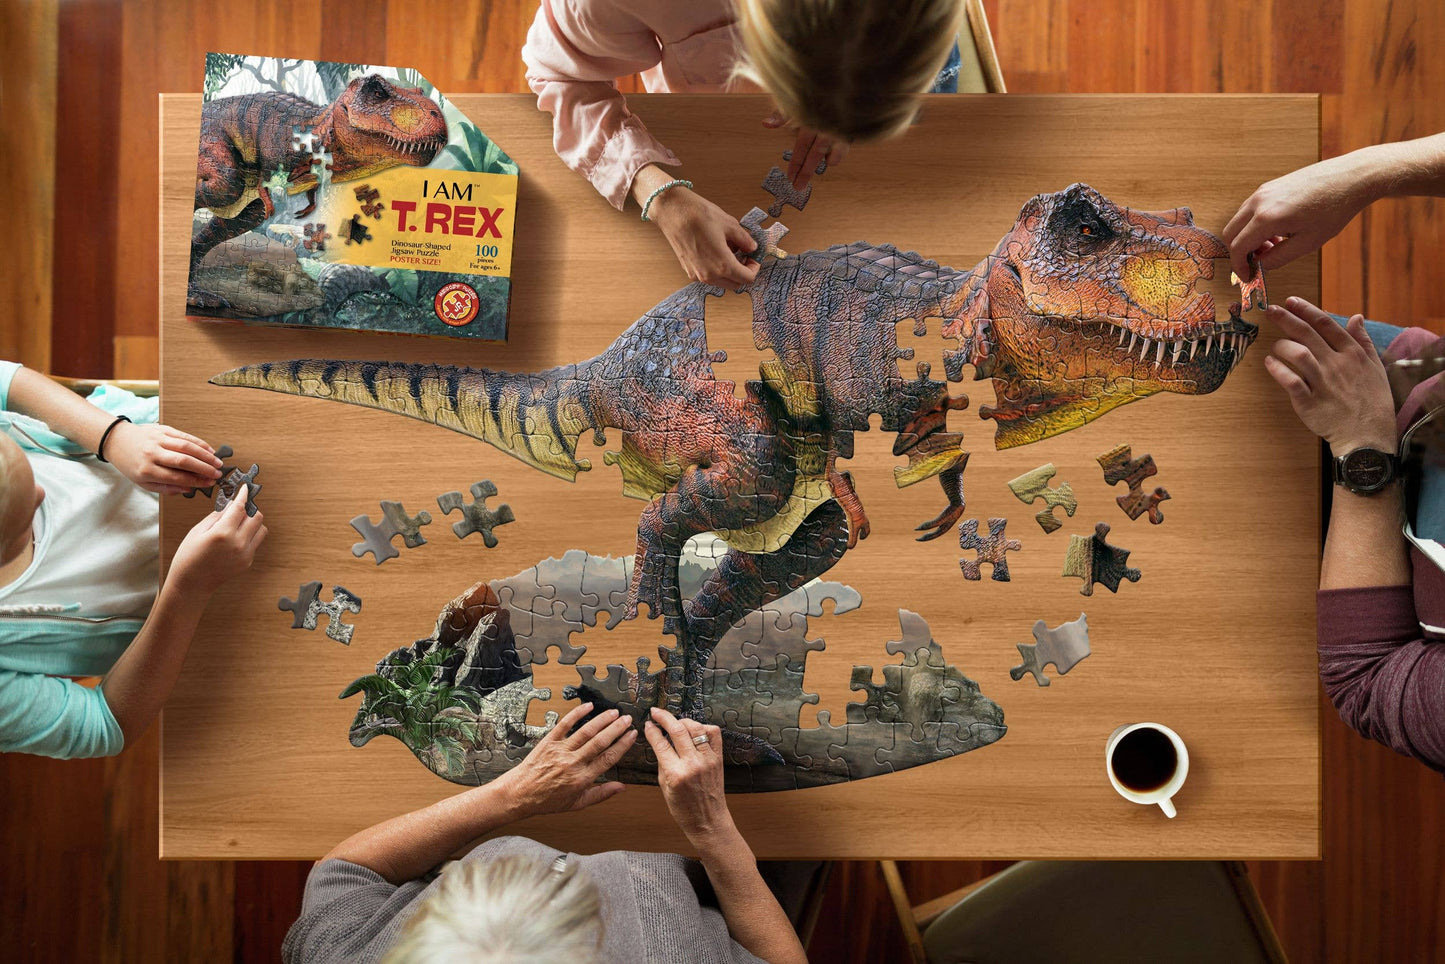 Madd Capp Games & Puzzles - I AM T. Rex 100 piece jigsaw puzzle - gift